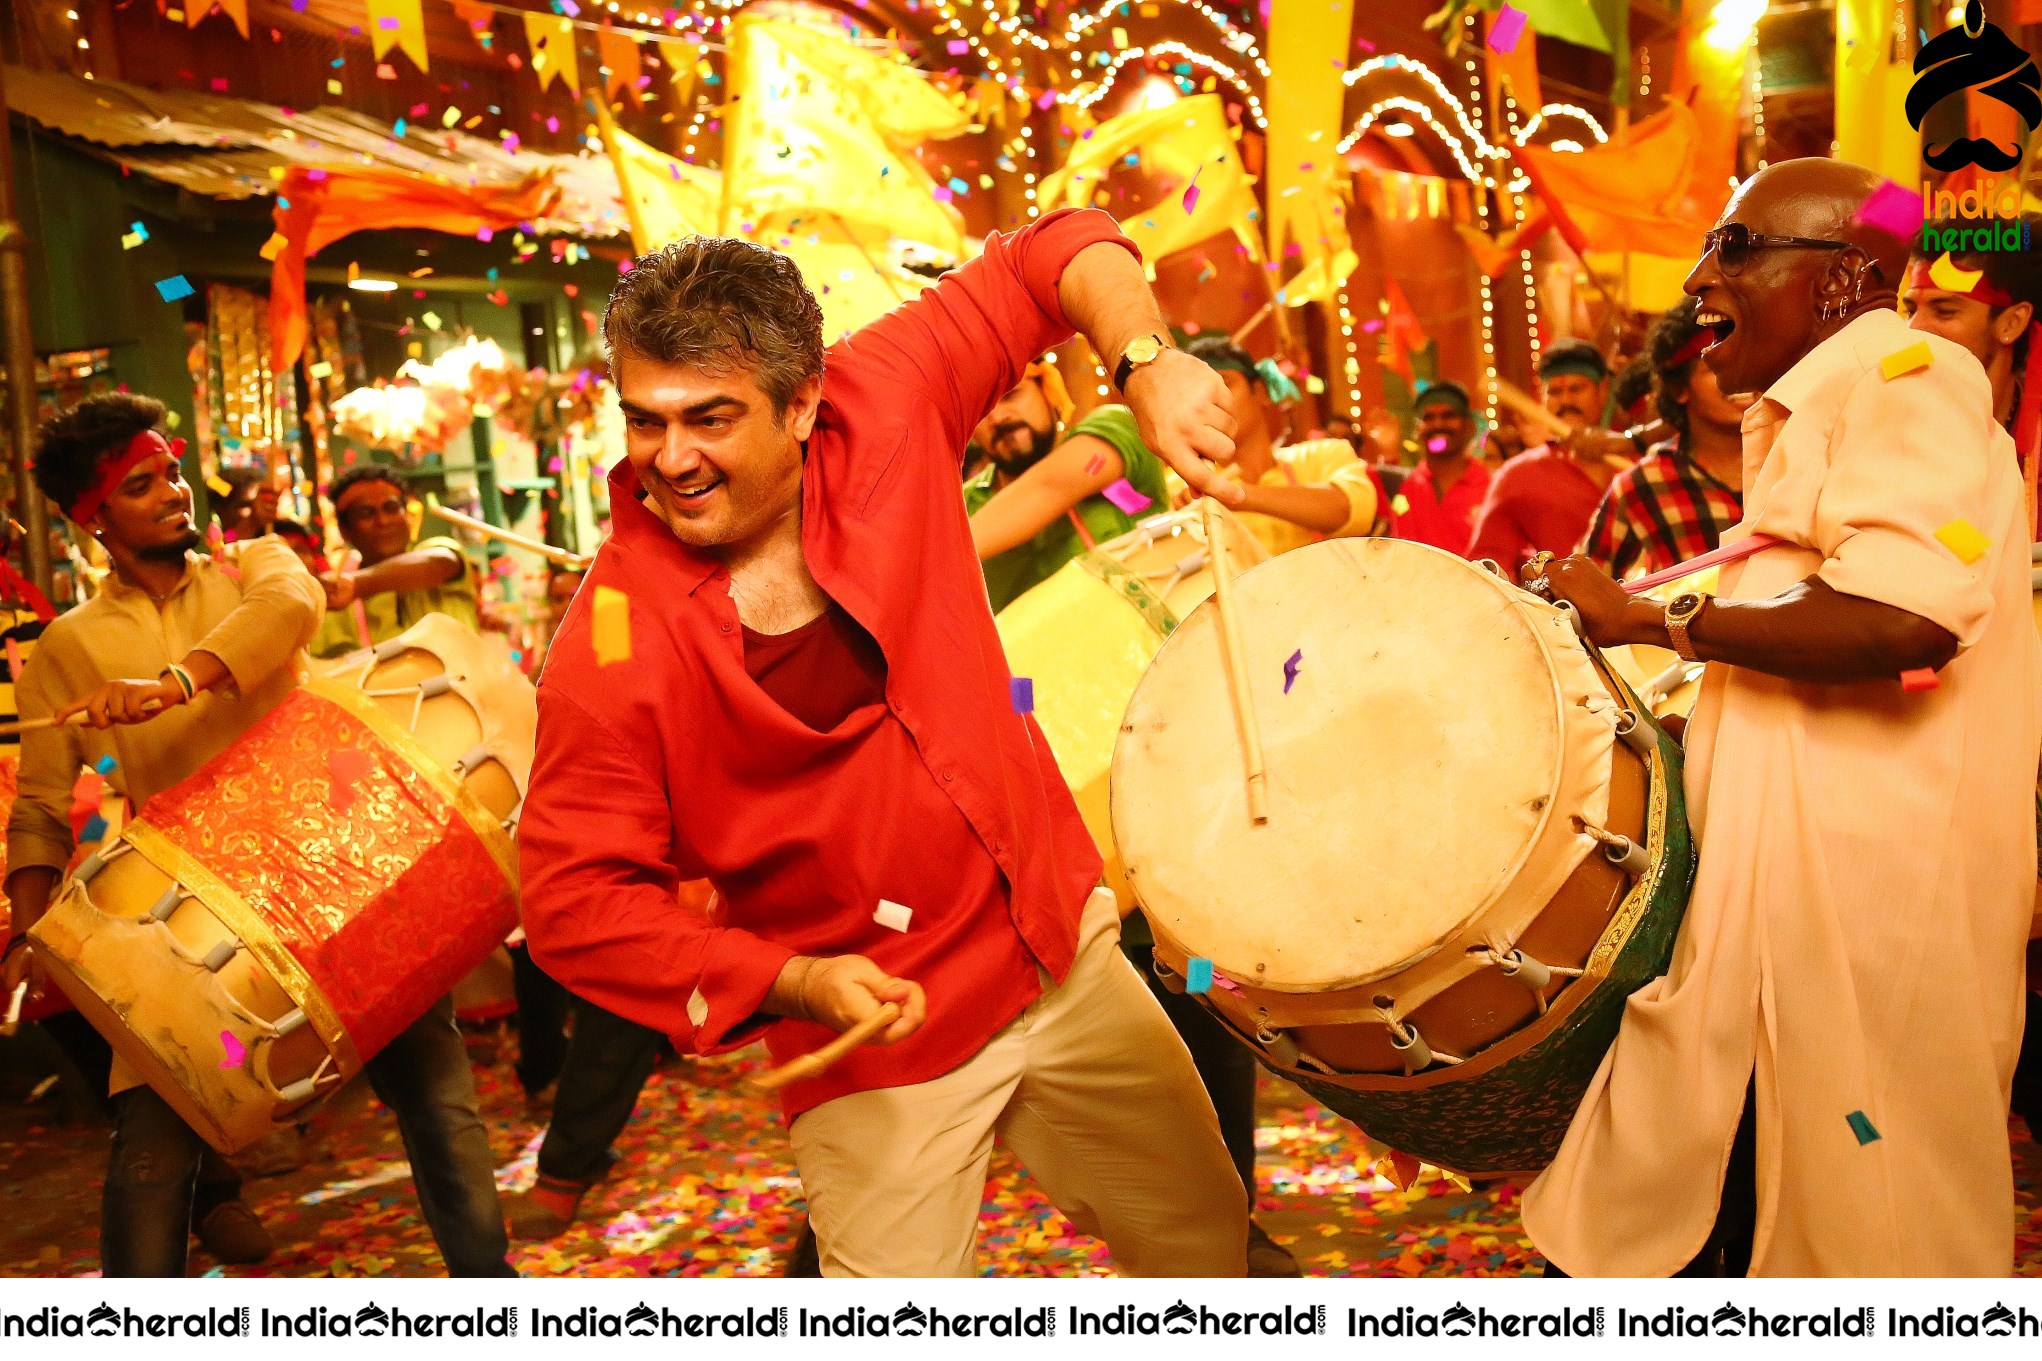 Rare and Unseen Stills of Ajith and Shruti Haasan in Vedalam Set 4